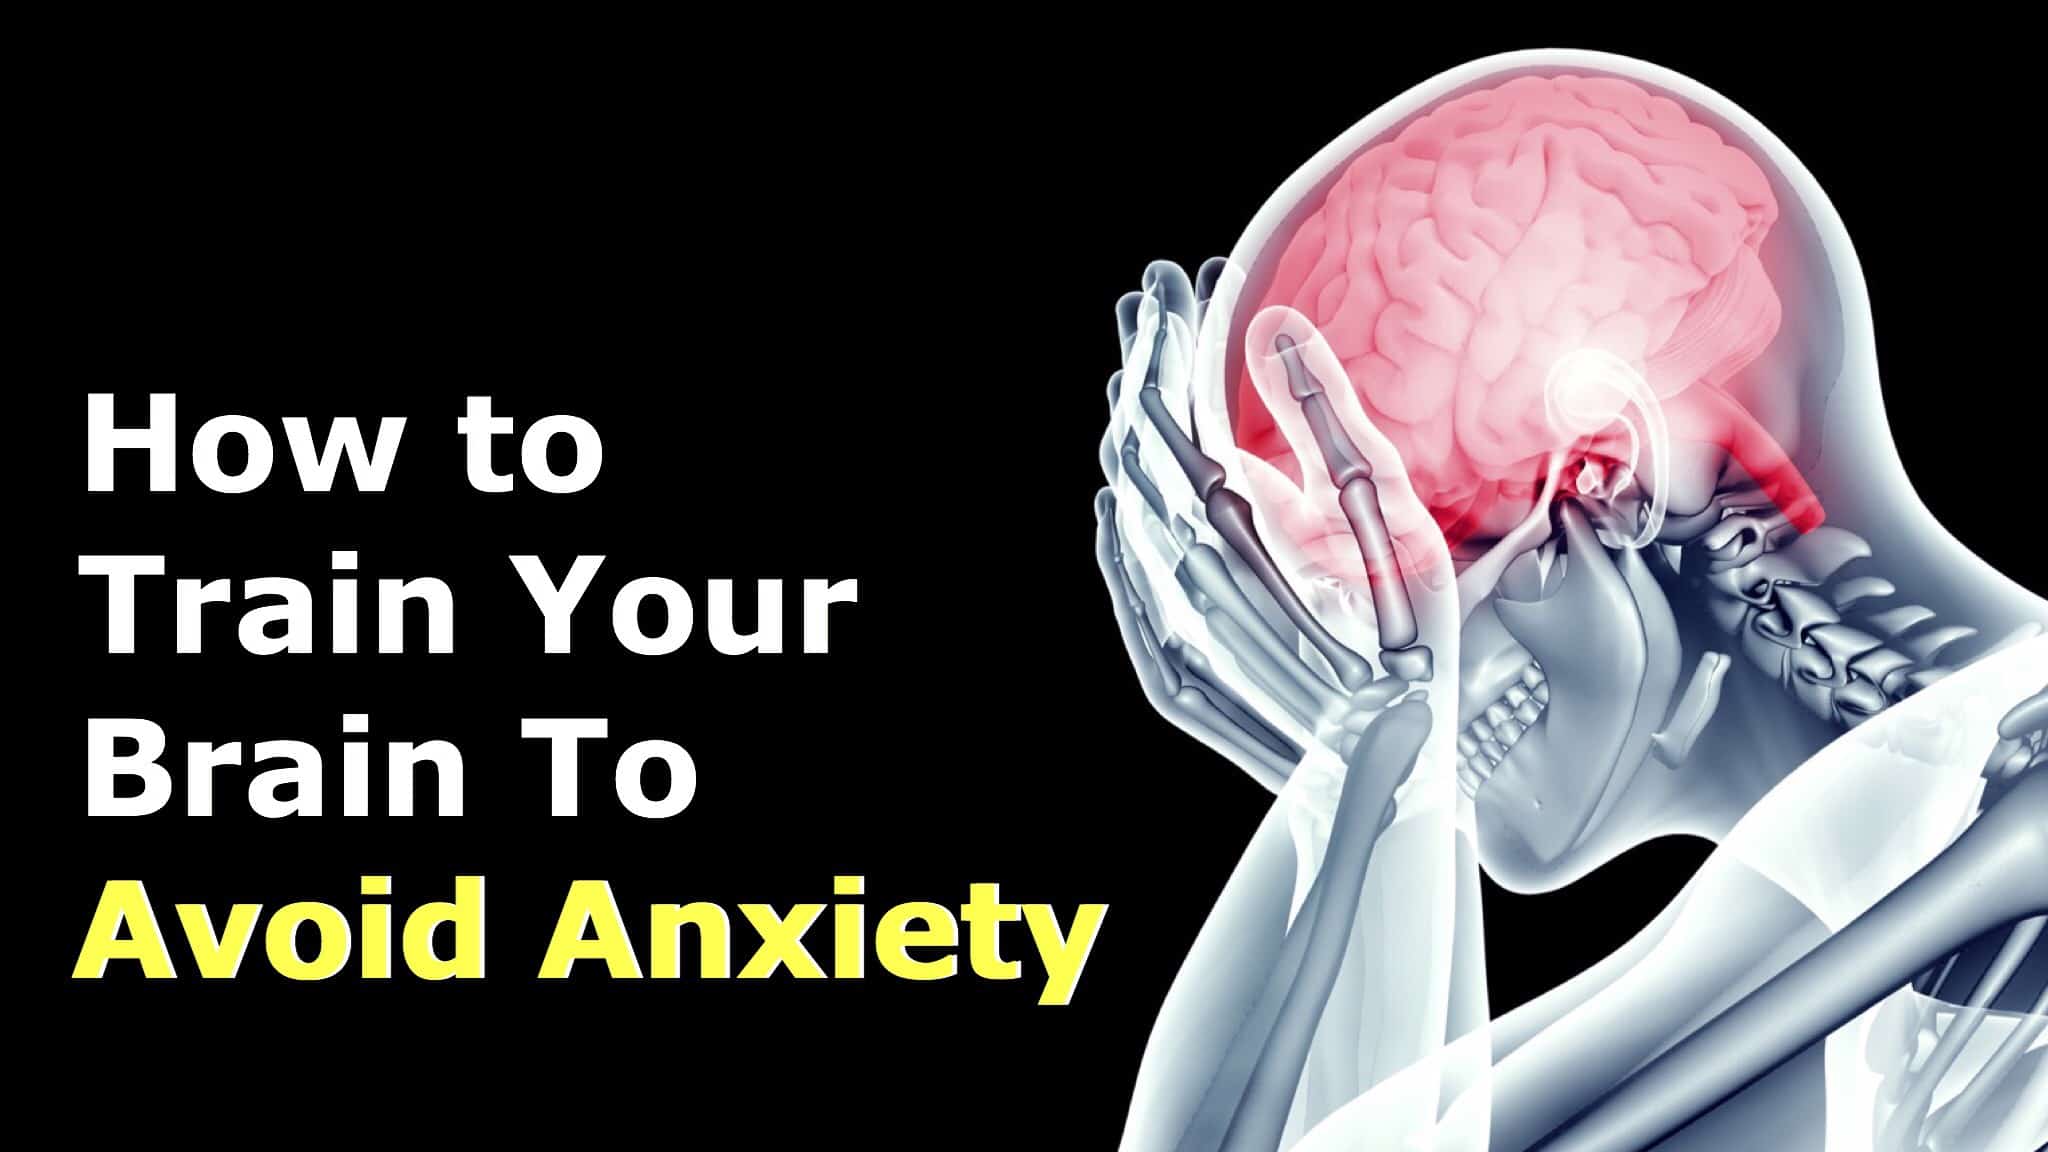 How to Train Your Brain To Avoid Anxiety